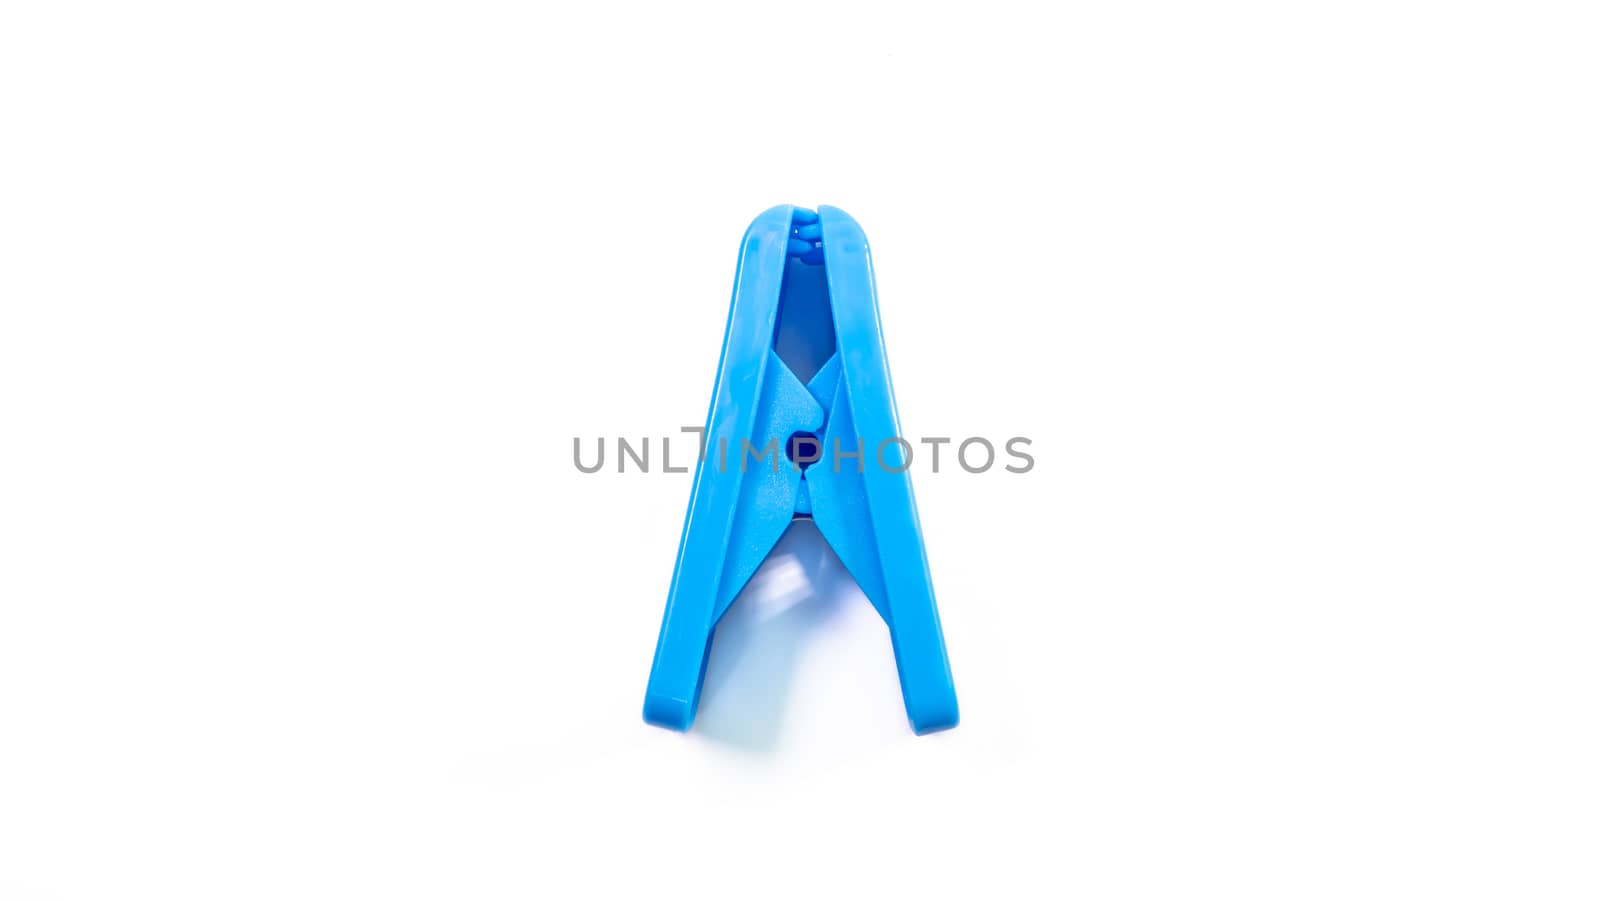 The close up of blue clothes peg on white background.